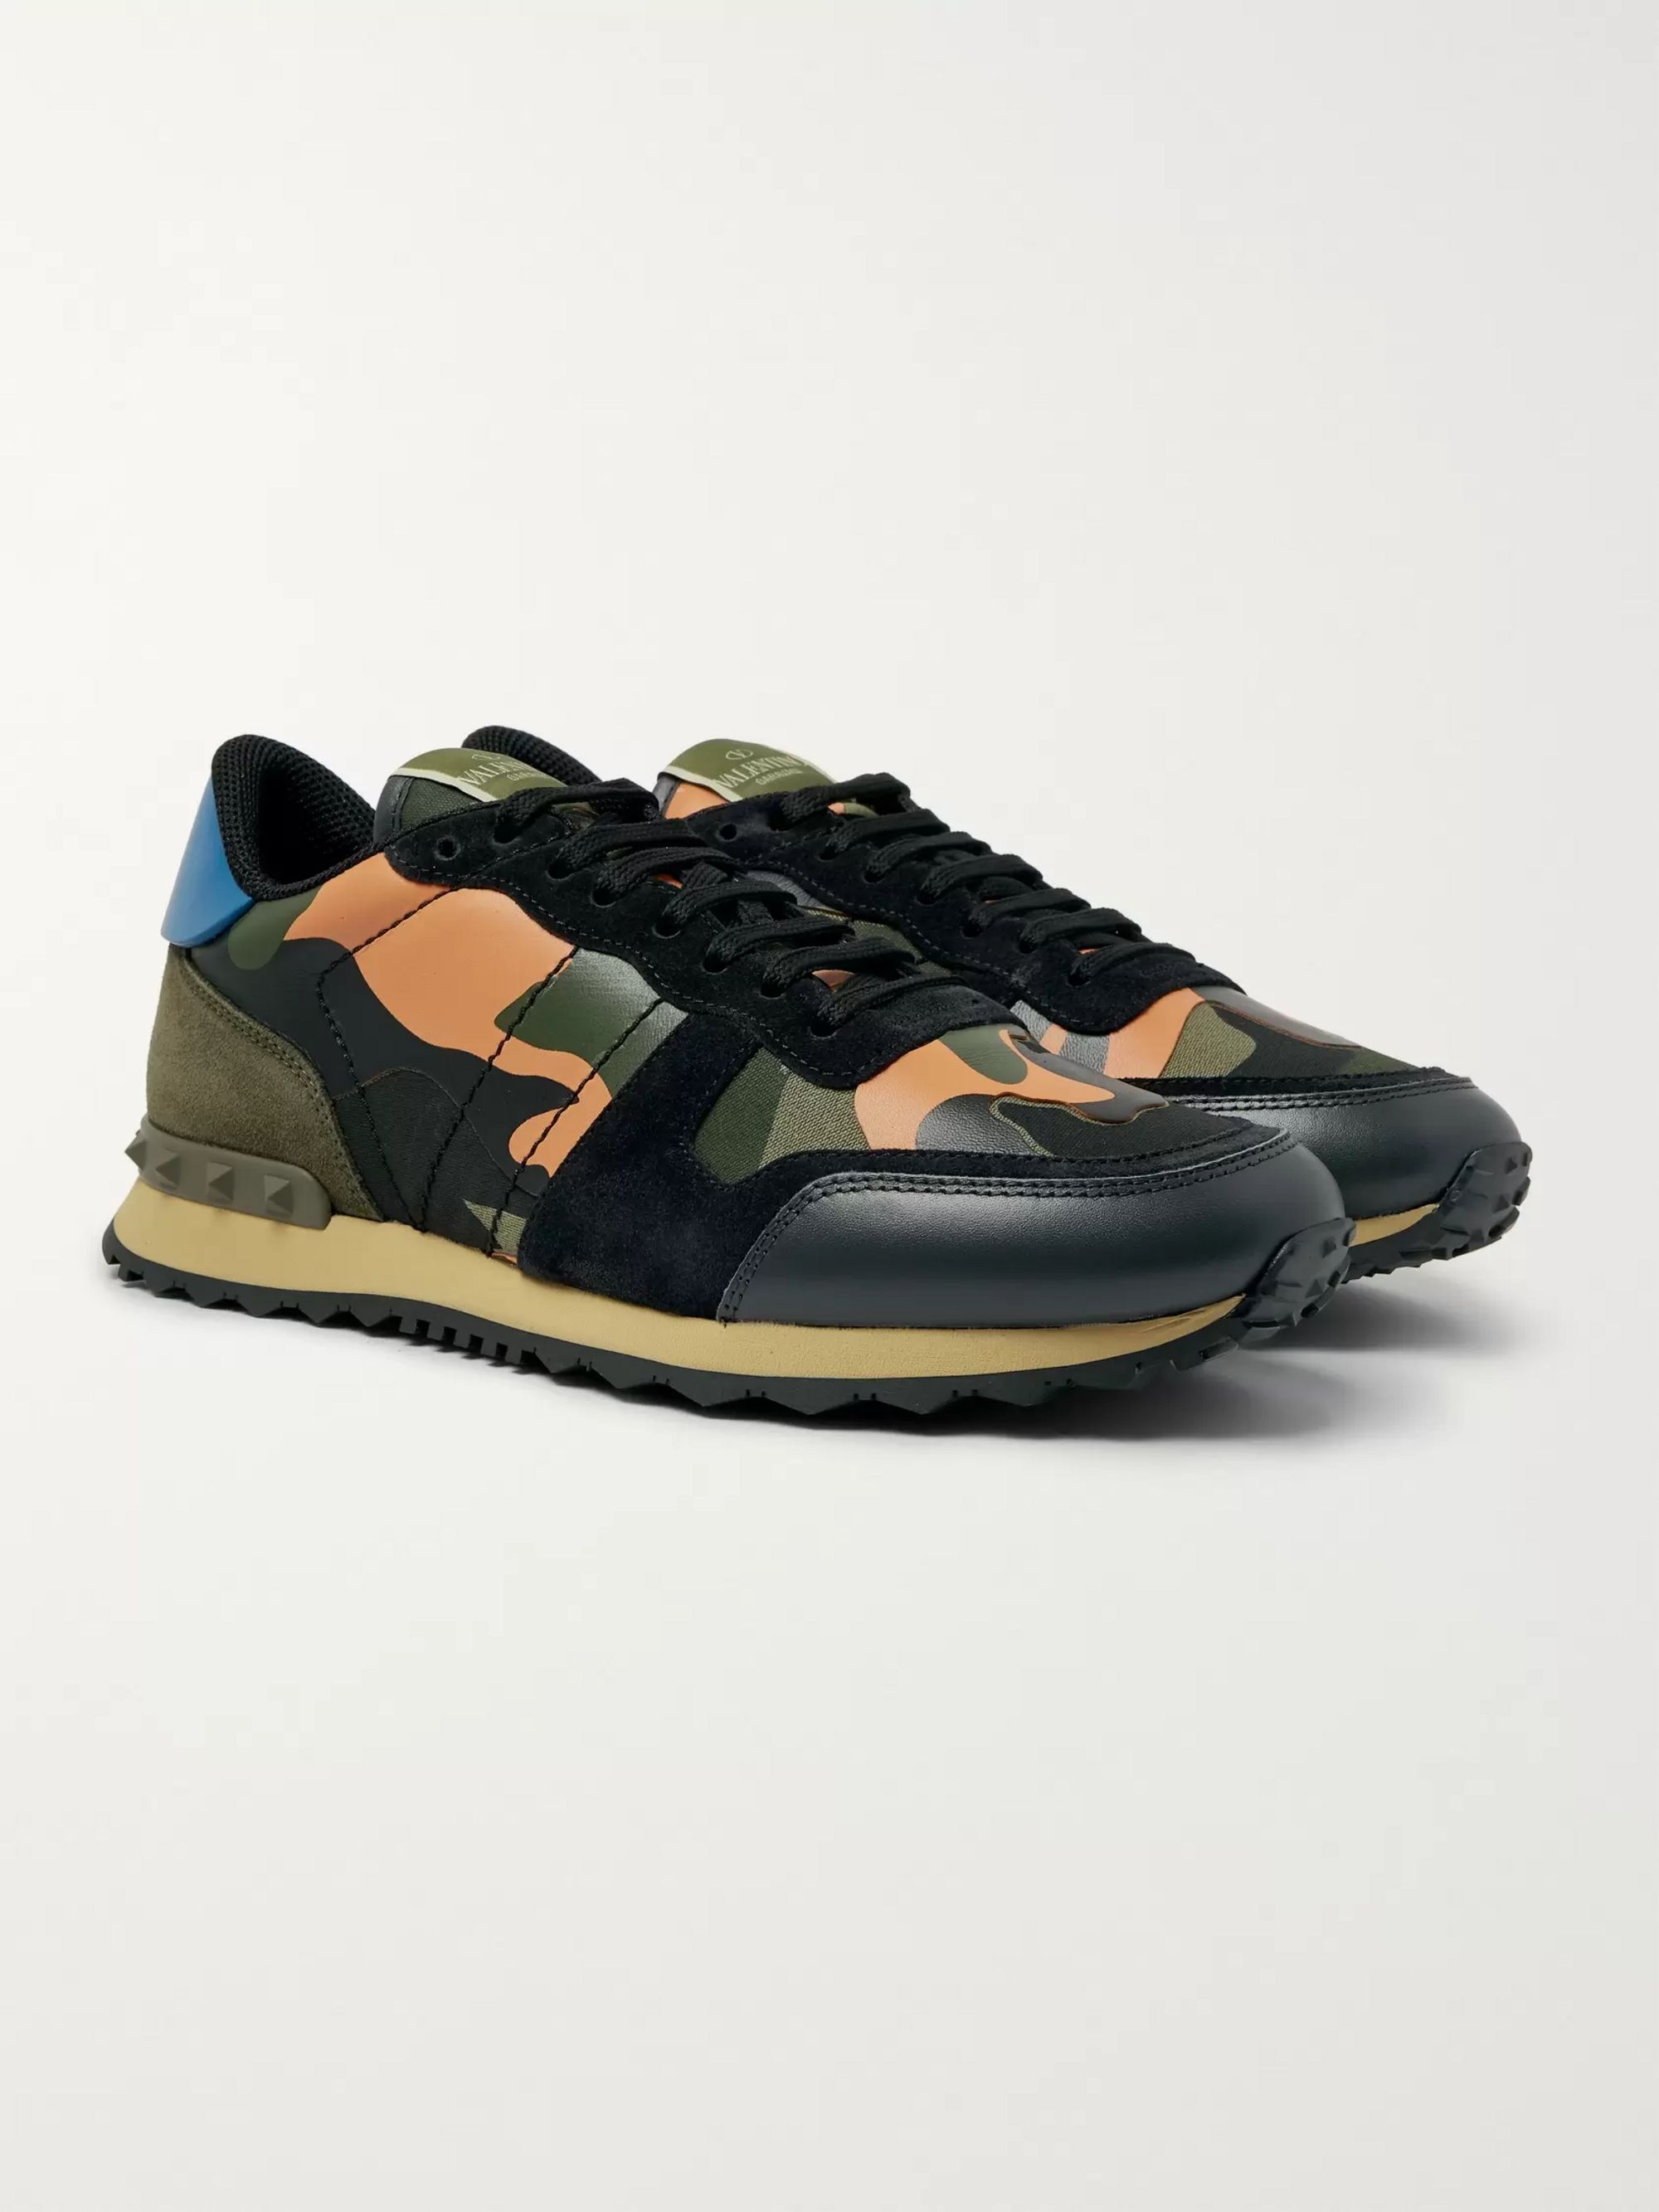 Sneakers Valentino Rockrunner Factory Sale, 55% OFF | www.hcb.cat